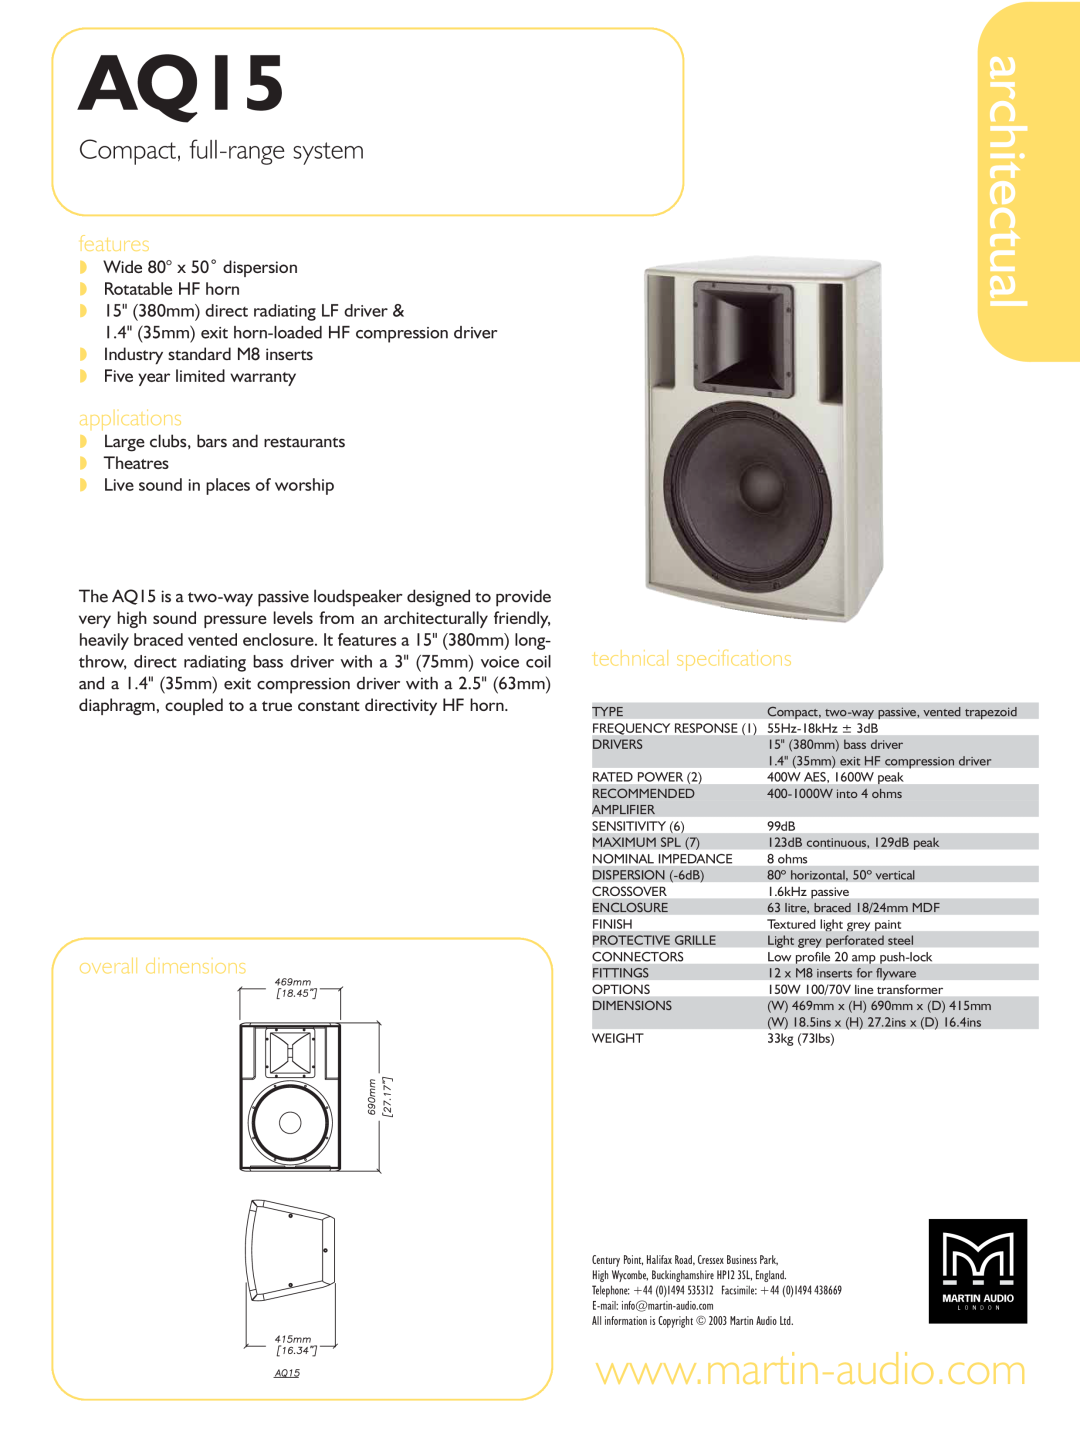 Martin Audio AQ15 technical specifications architectual, Compact, full-range system, features, applications 